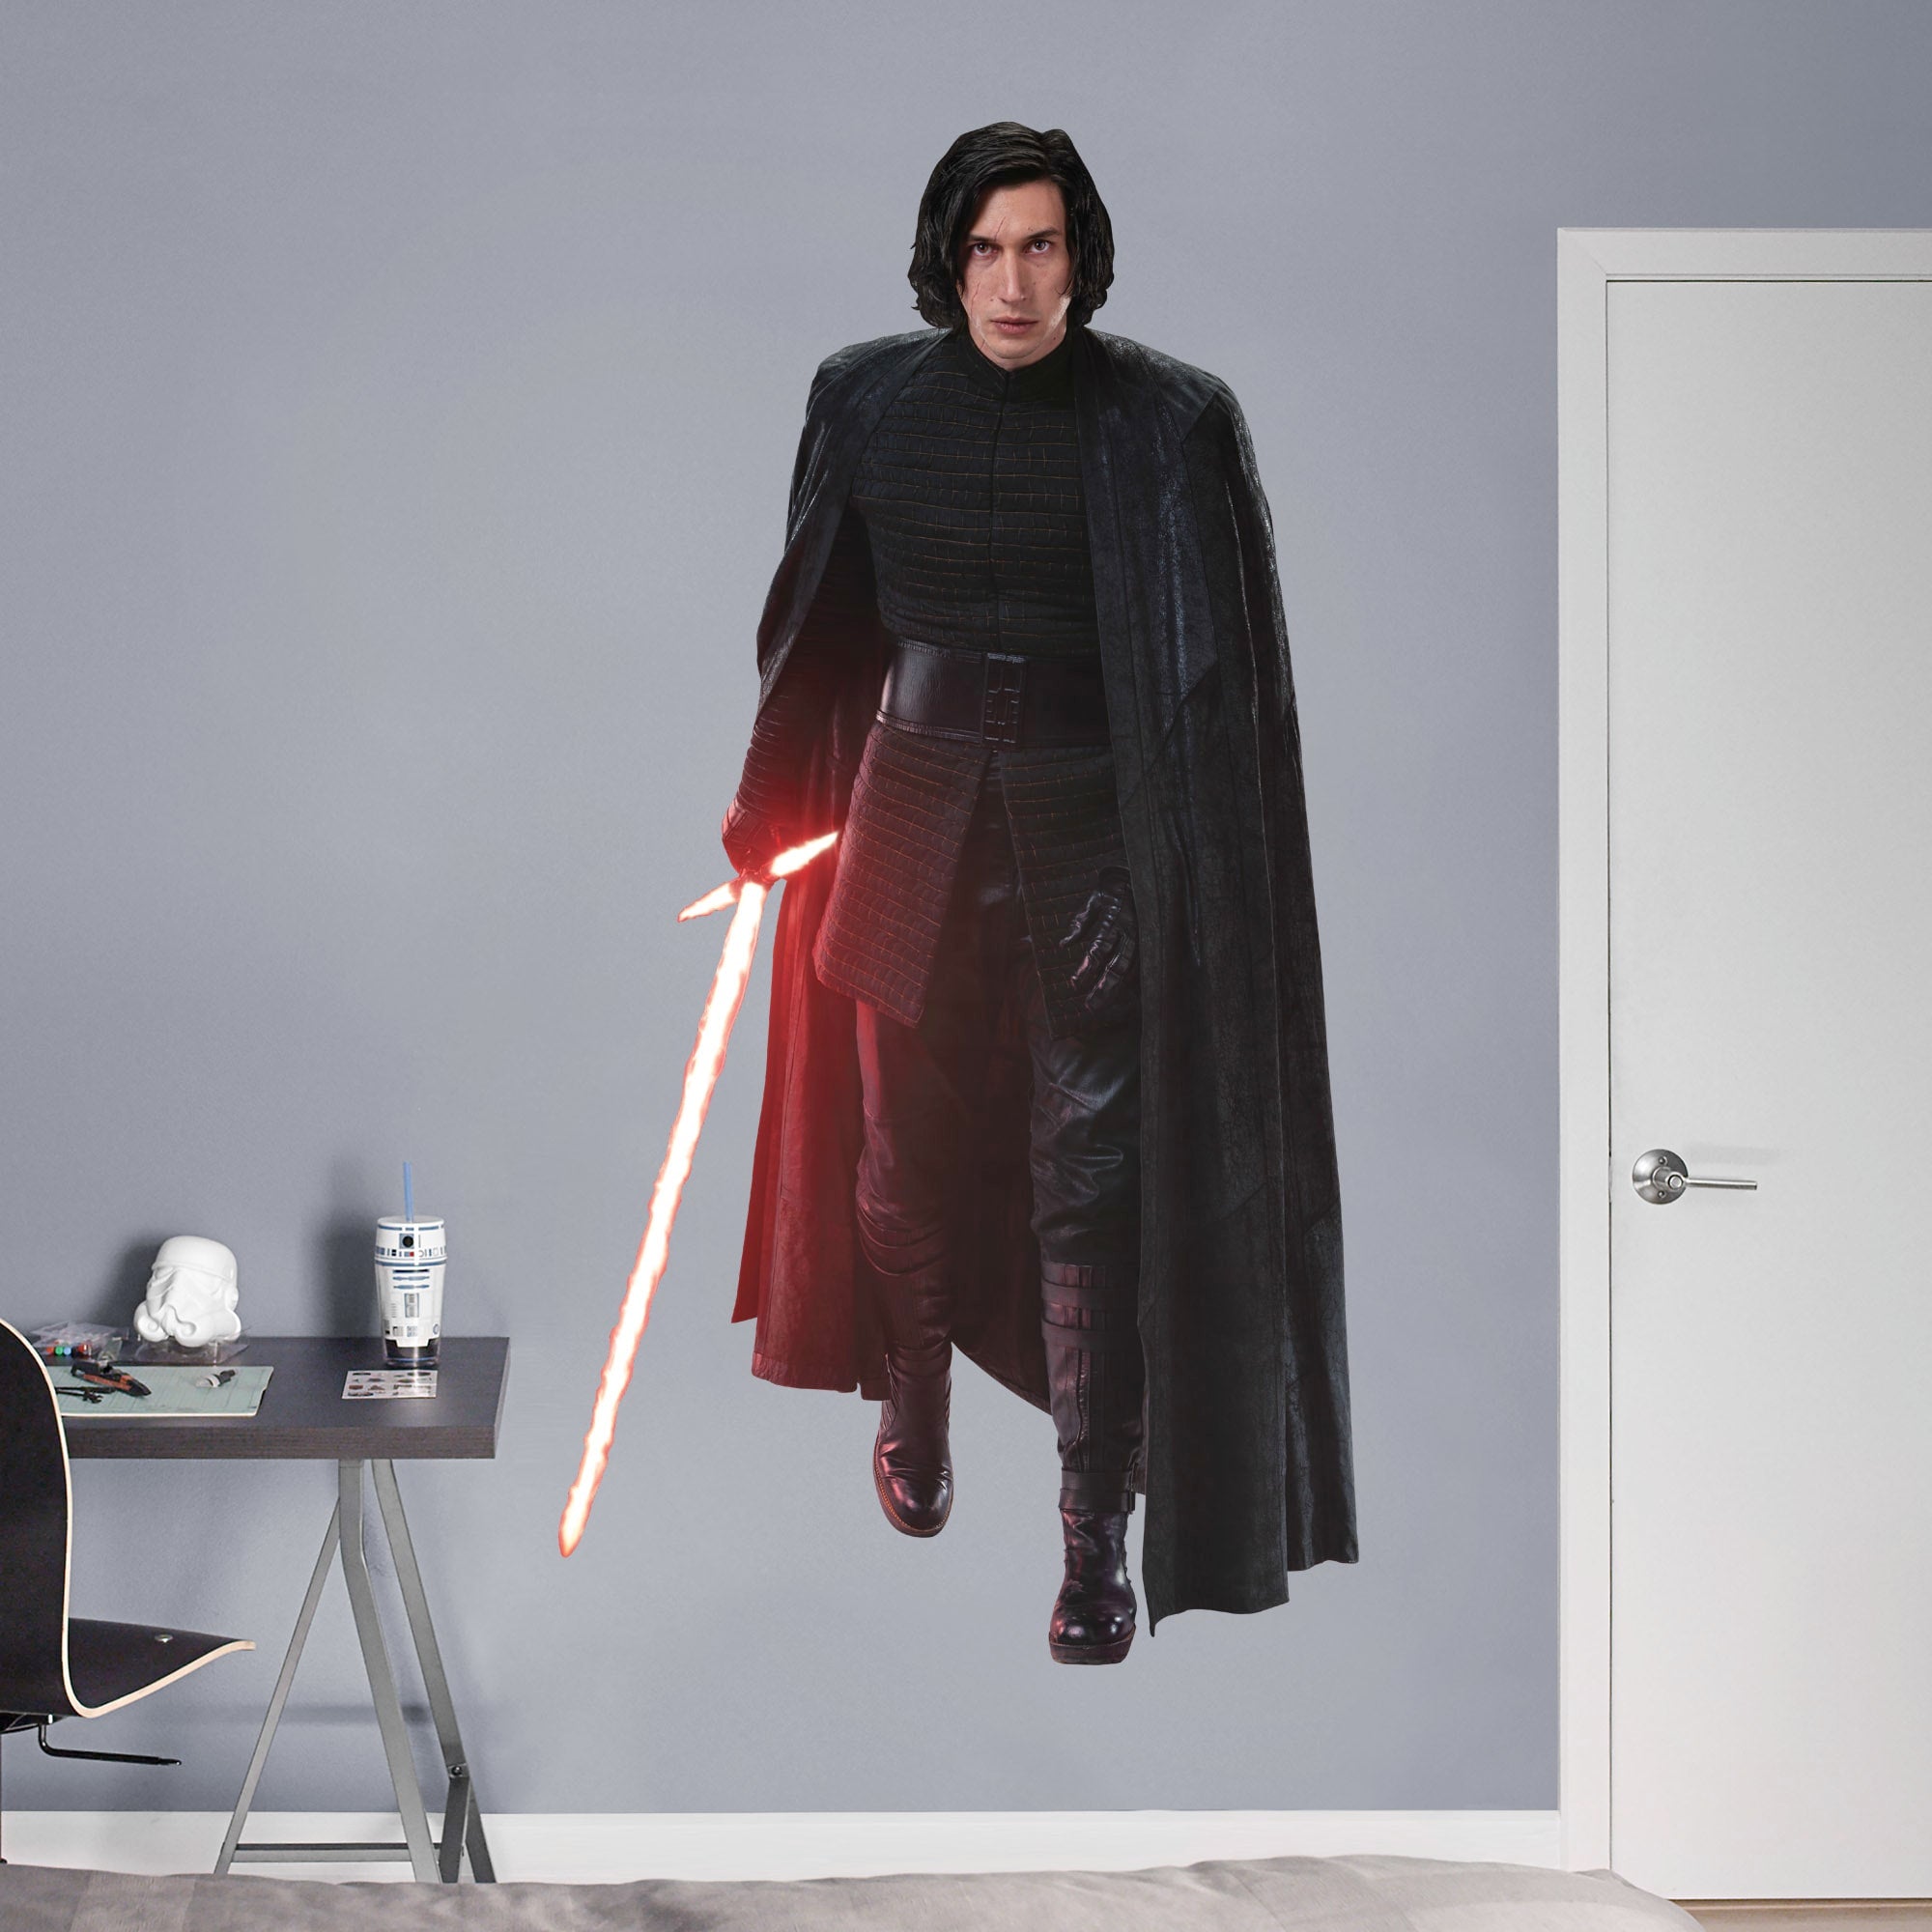 Kylo Ren: Unmasked - Officially Licensed Removable Wall Decal Life-Size Character + 2 Decals (40"W x 77"H) by Fathead | Vinyl